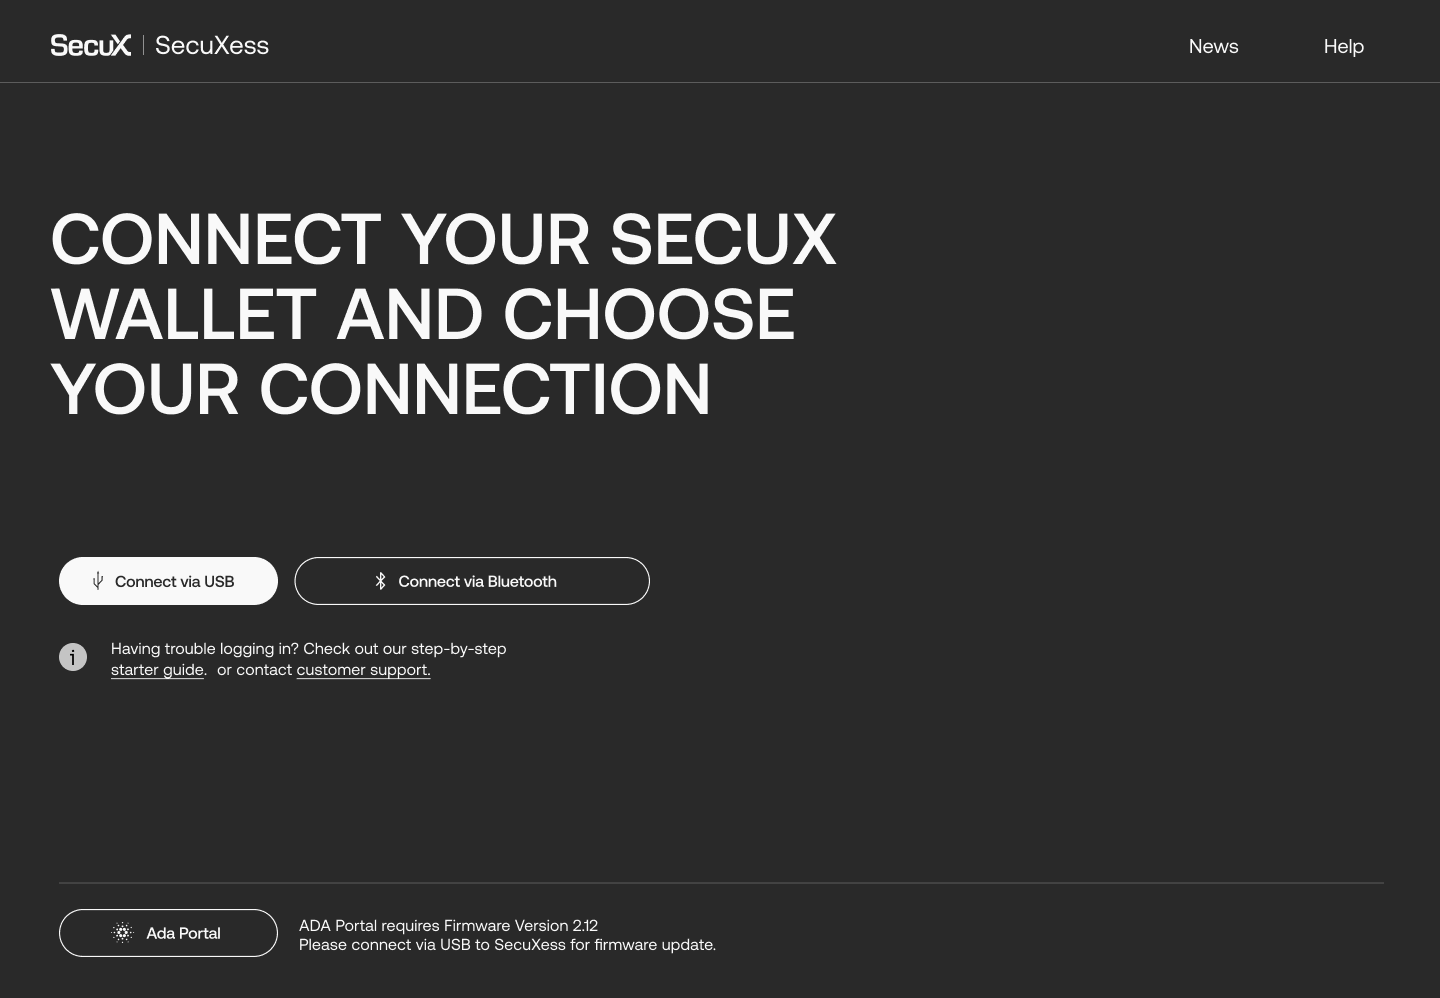 What’s new in our web app SecuXess 1